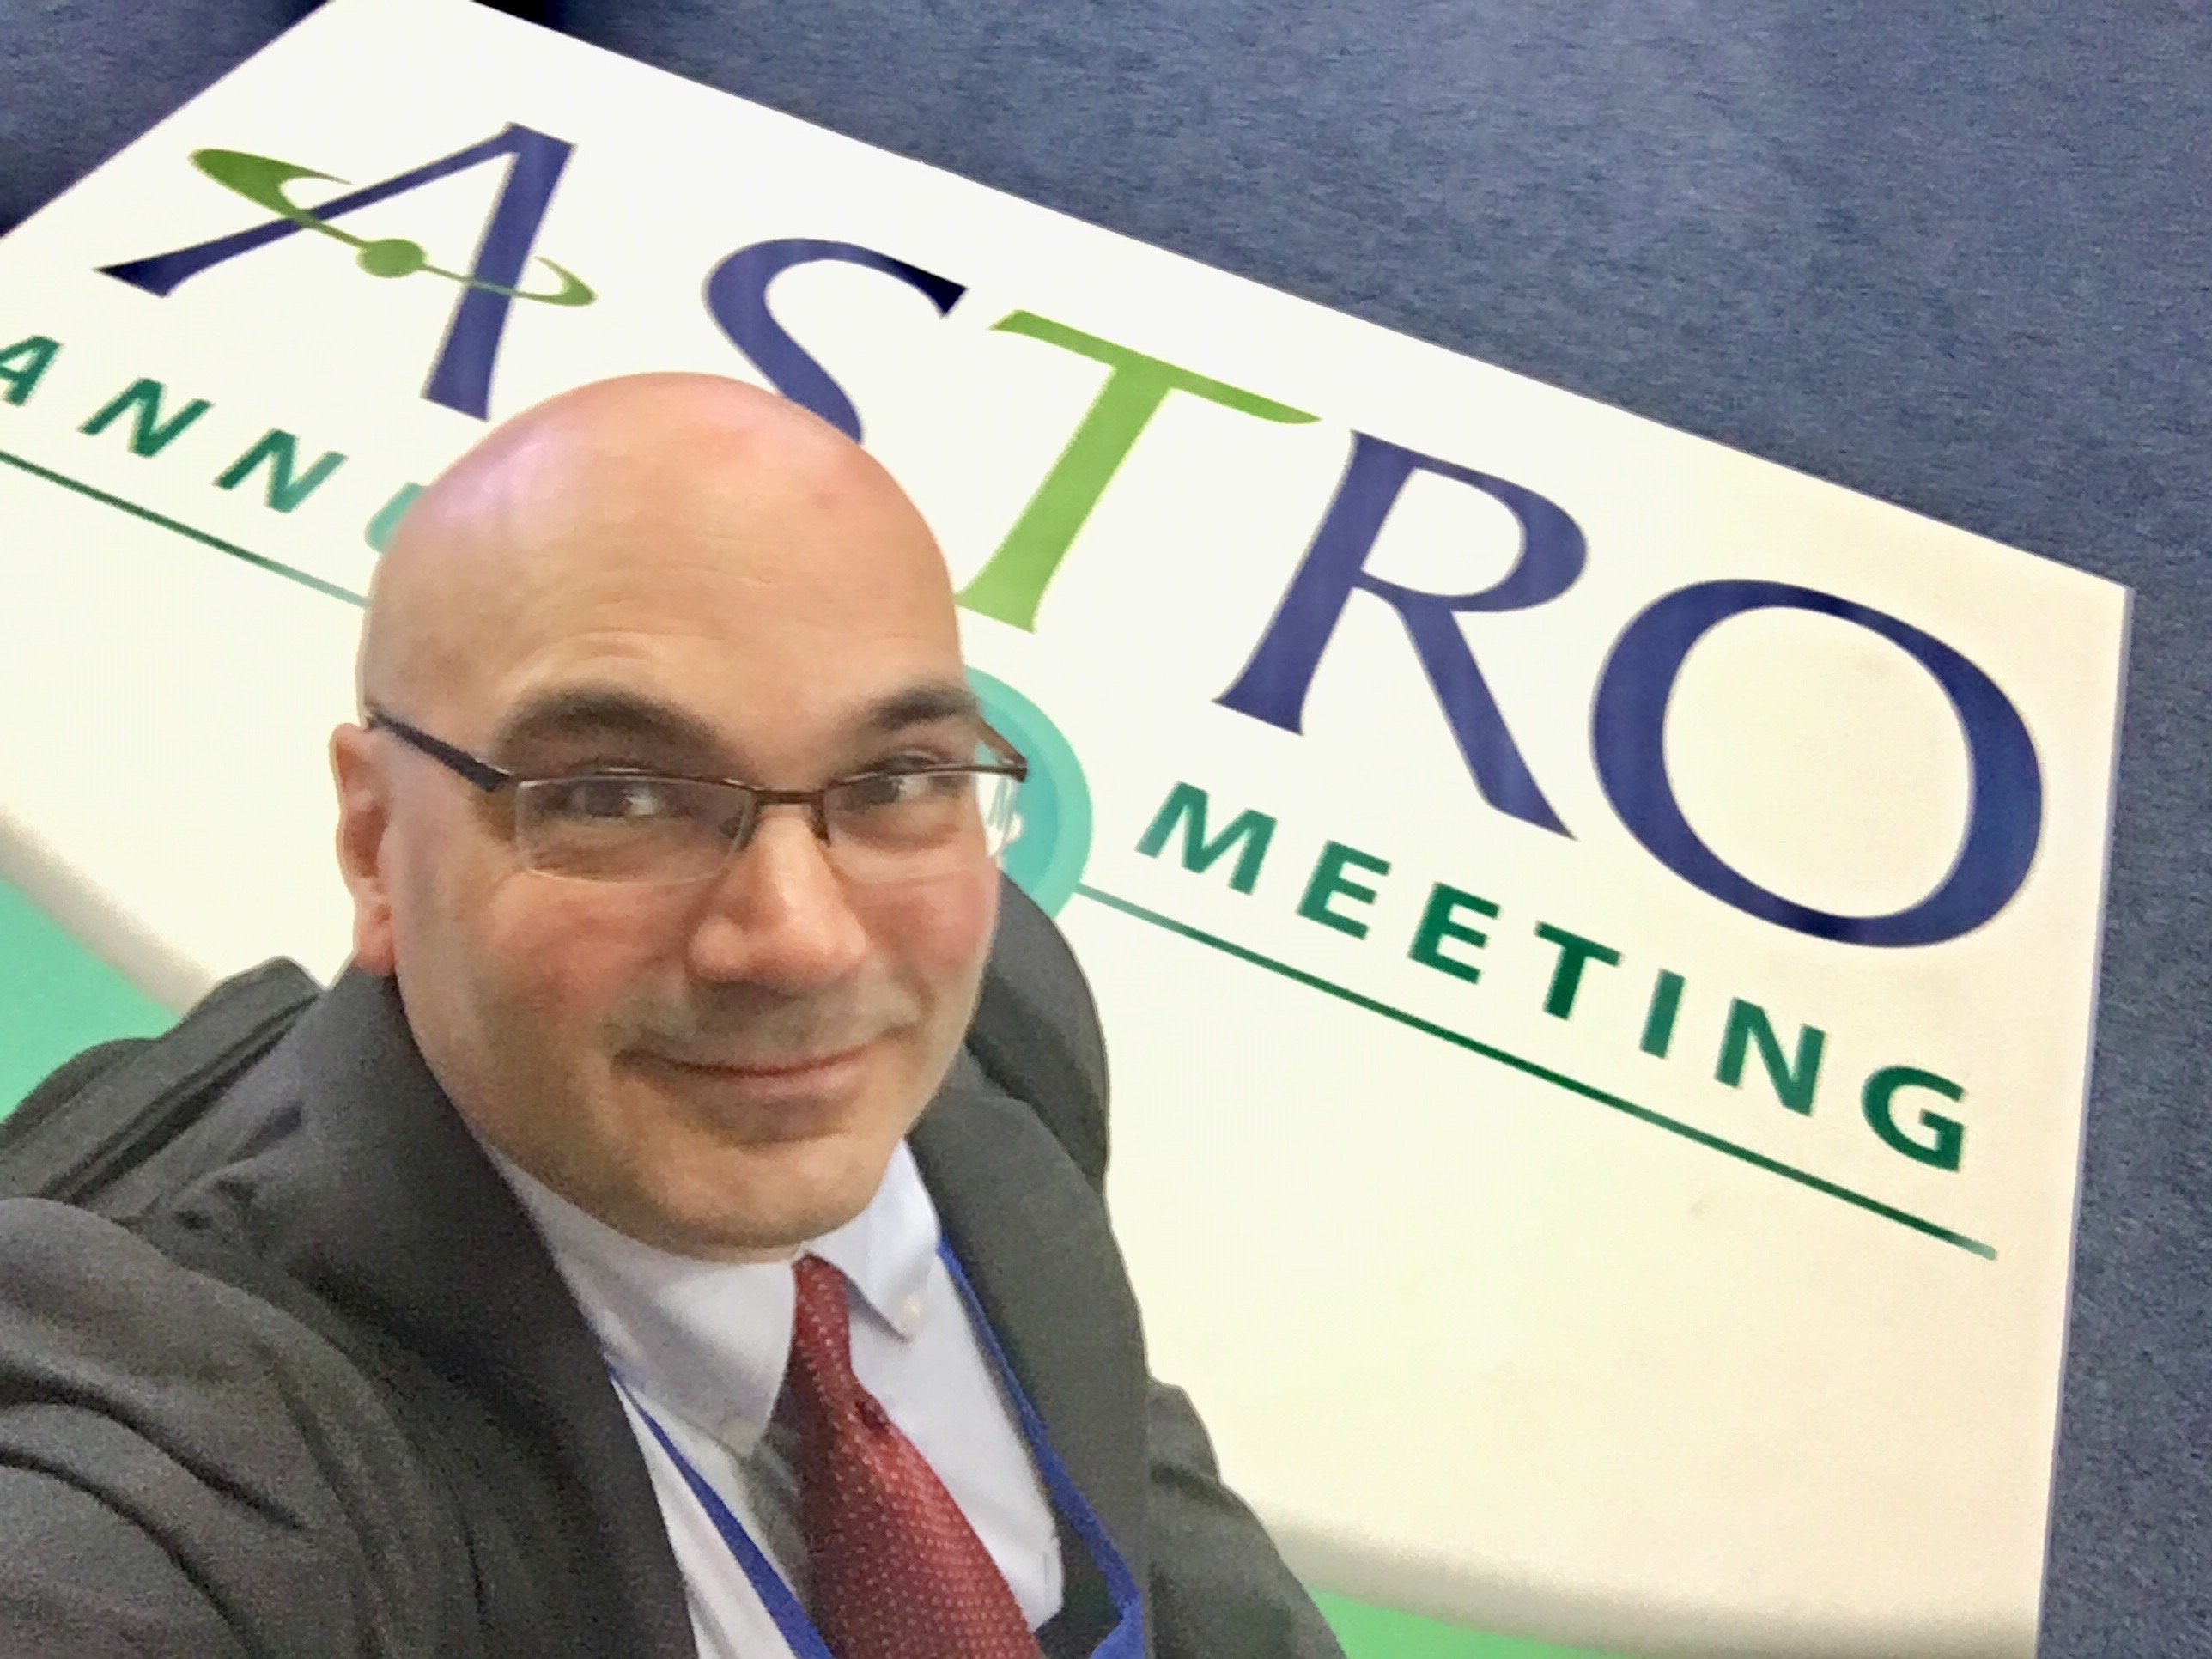 ITN Editor Dave Fornell at the ASTRO 2018 radiation oncology meeting.